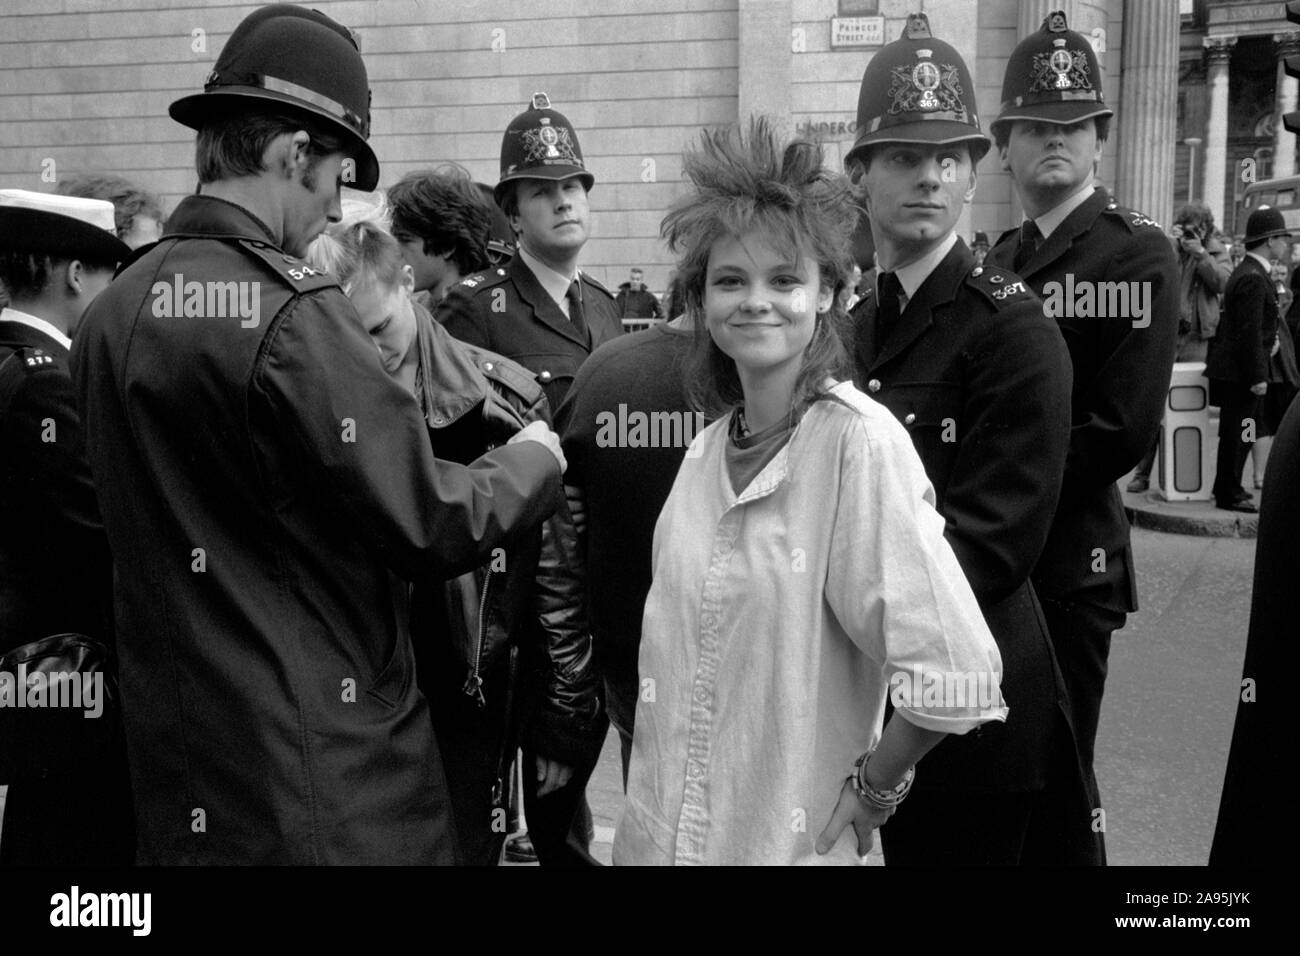 Punk teen girl 1980s at Stop the City of London demonstration UK 27th September 1984. Anti capitalism protest against bankers 80s England. Police conducting a Stop and Search on youth. Girl friend posing. HOMER SYKES Stock Photo